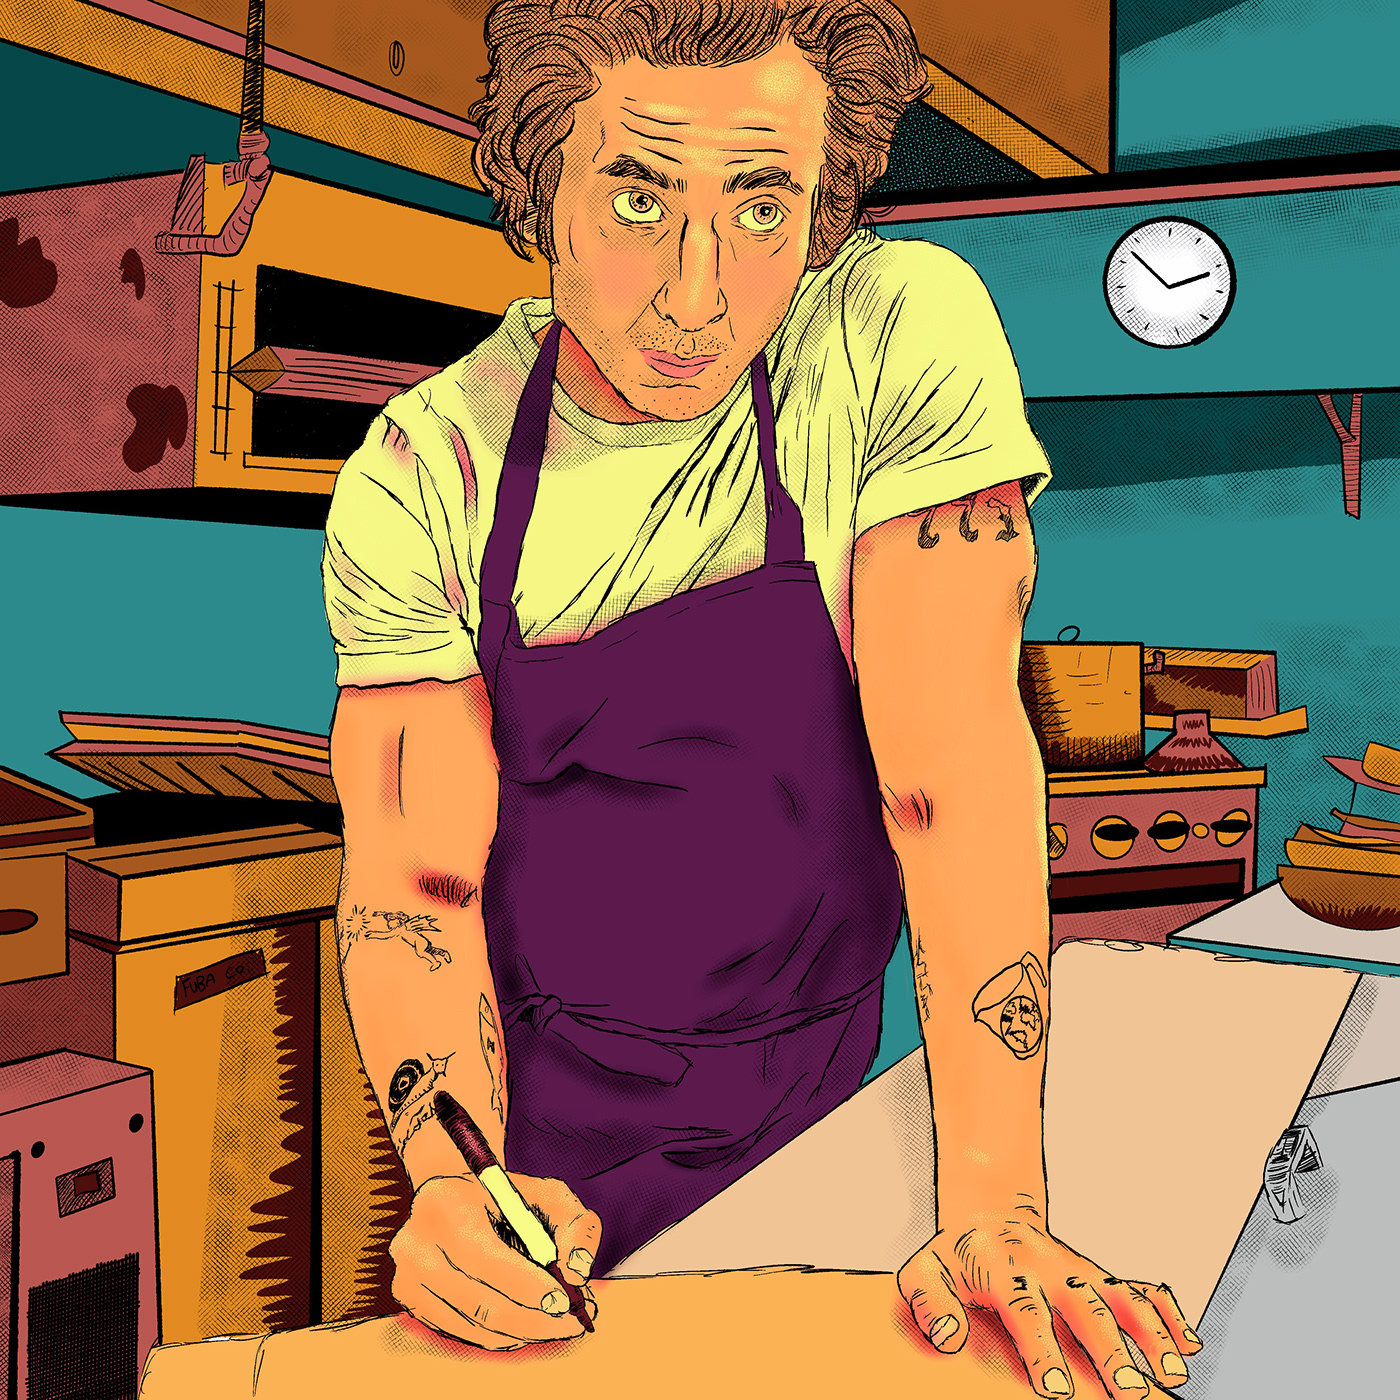 ILLUSTRATION  Digital Art  Procreate Drawing  draw process sketch psychedelic colors The bear cook kitchen Character Carmy cuisine Jeremy Allen White арт